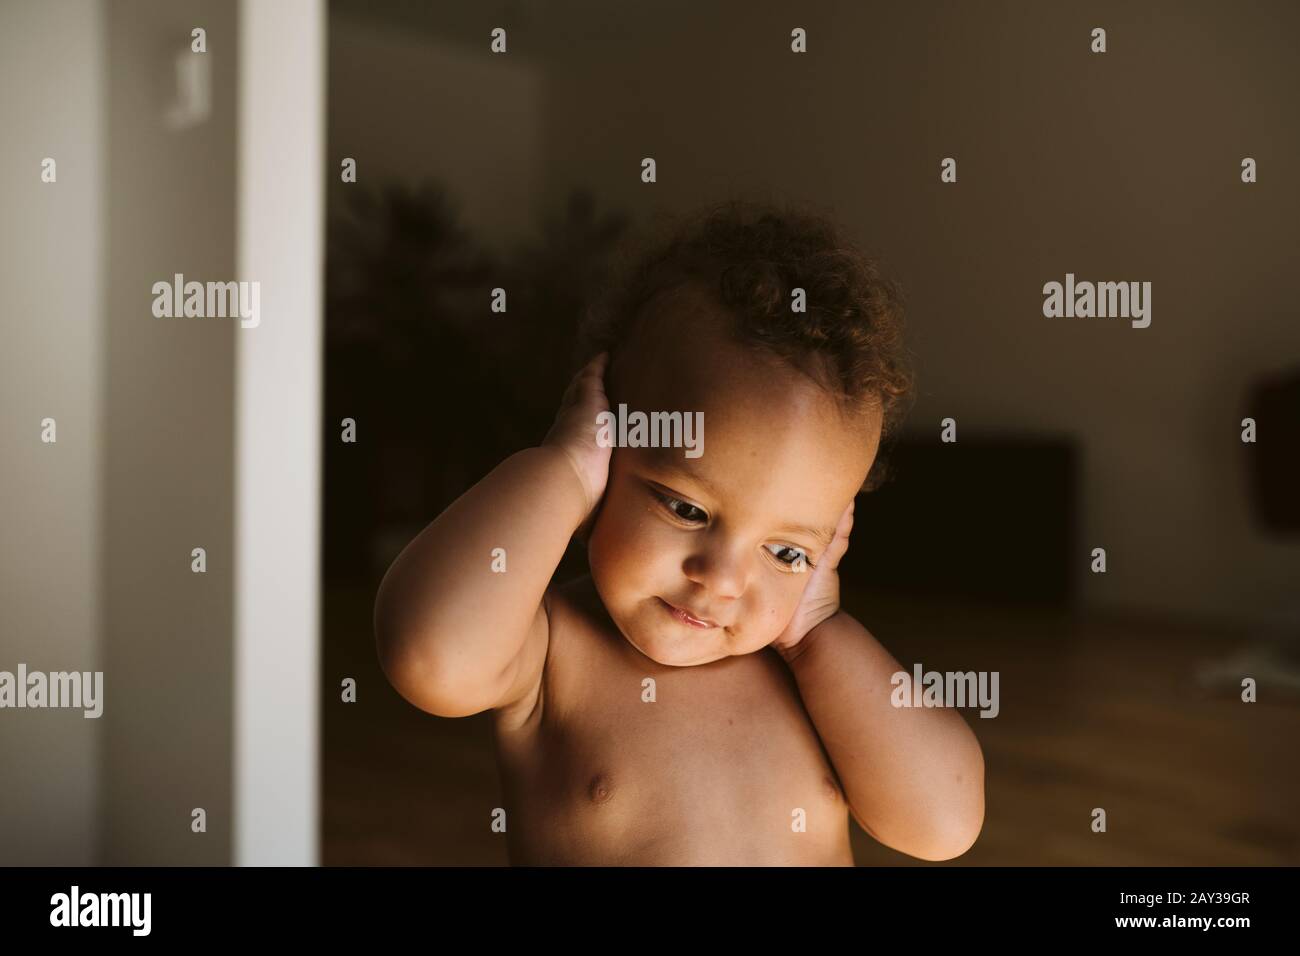 Toddler covering ears Stock Photo